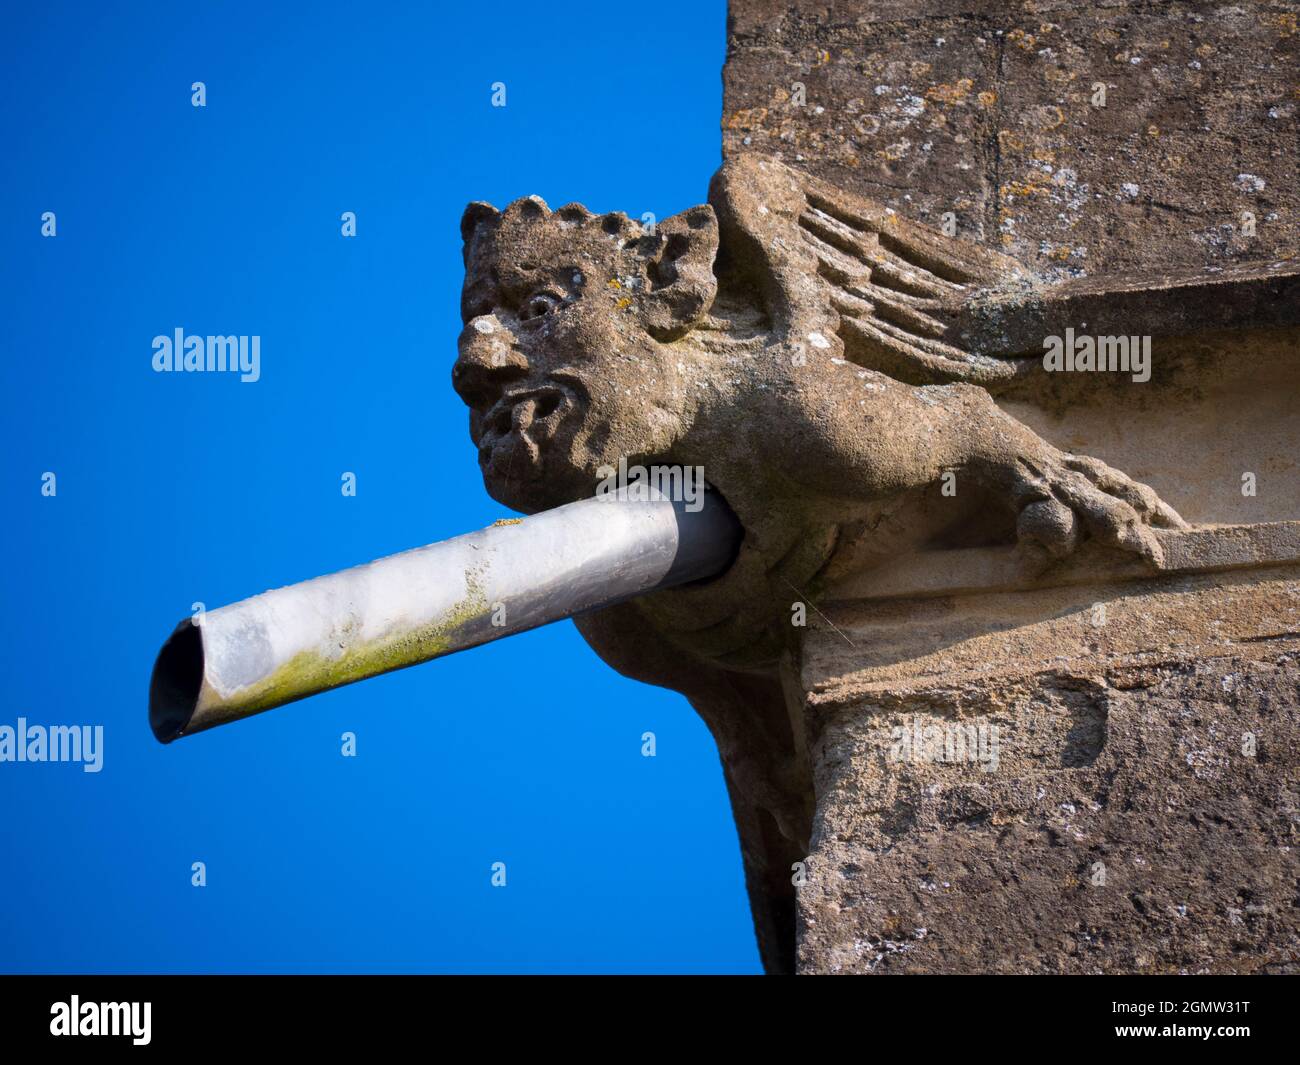 Radley, Oxfordshire, England - 11 April 2021;  no people in view.   A quirky, dual-purpose drainpipe gargoyle stuck on top of the walls of my local pa Stock Photo